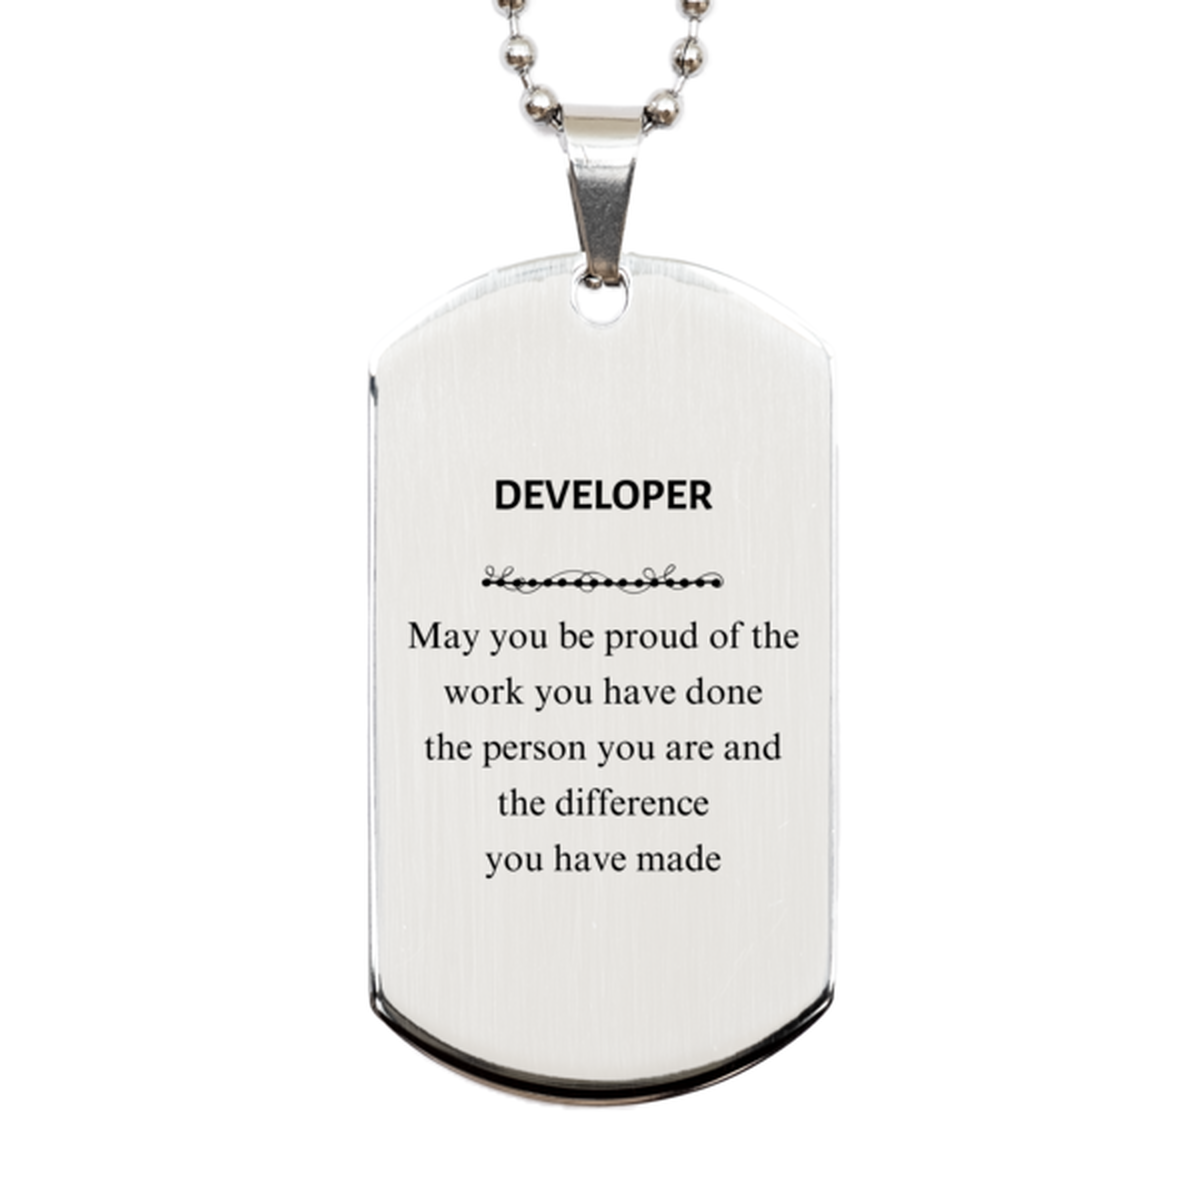 Developer May you be proud of the work you have done, Retirement Developer Silver Dog Tag for Colleague Appreciation Gifts Amazing for Developer